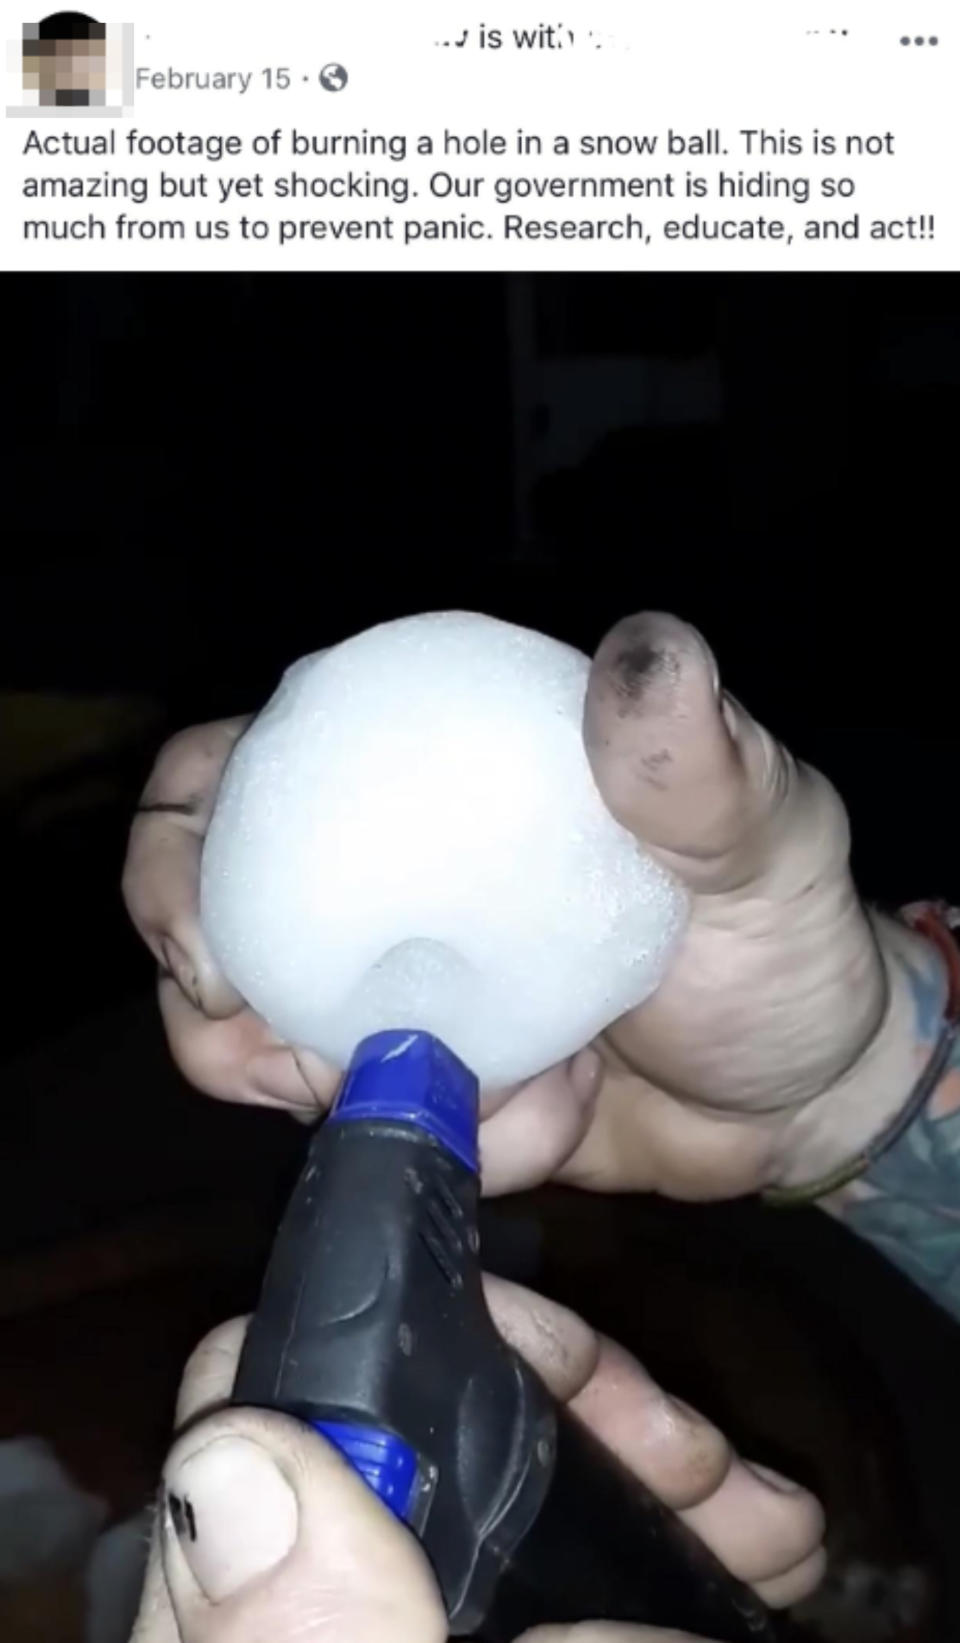 Person holds a snowball with a hole being melted by a lighter to suggest it's an example of how government is keeping information from us